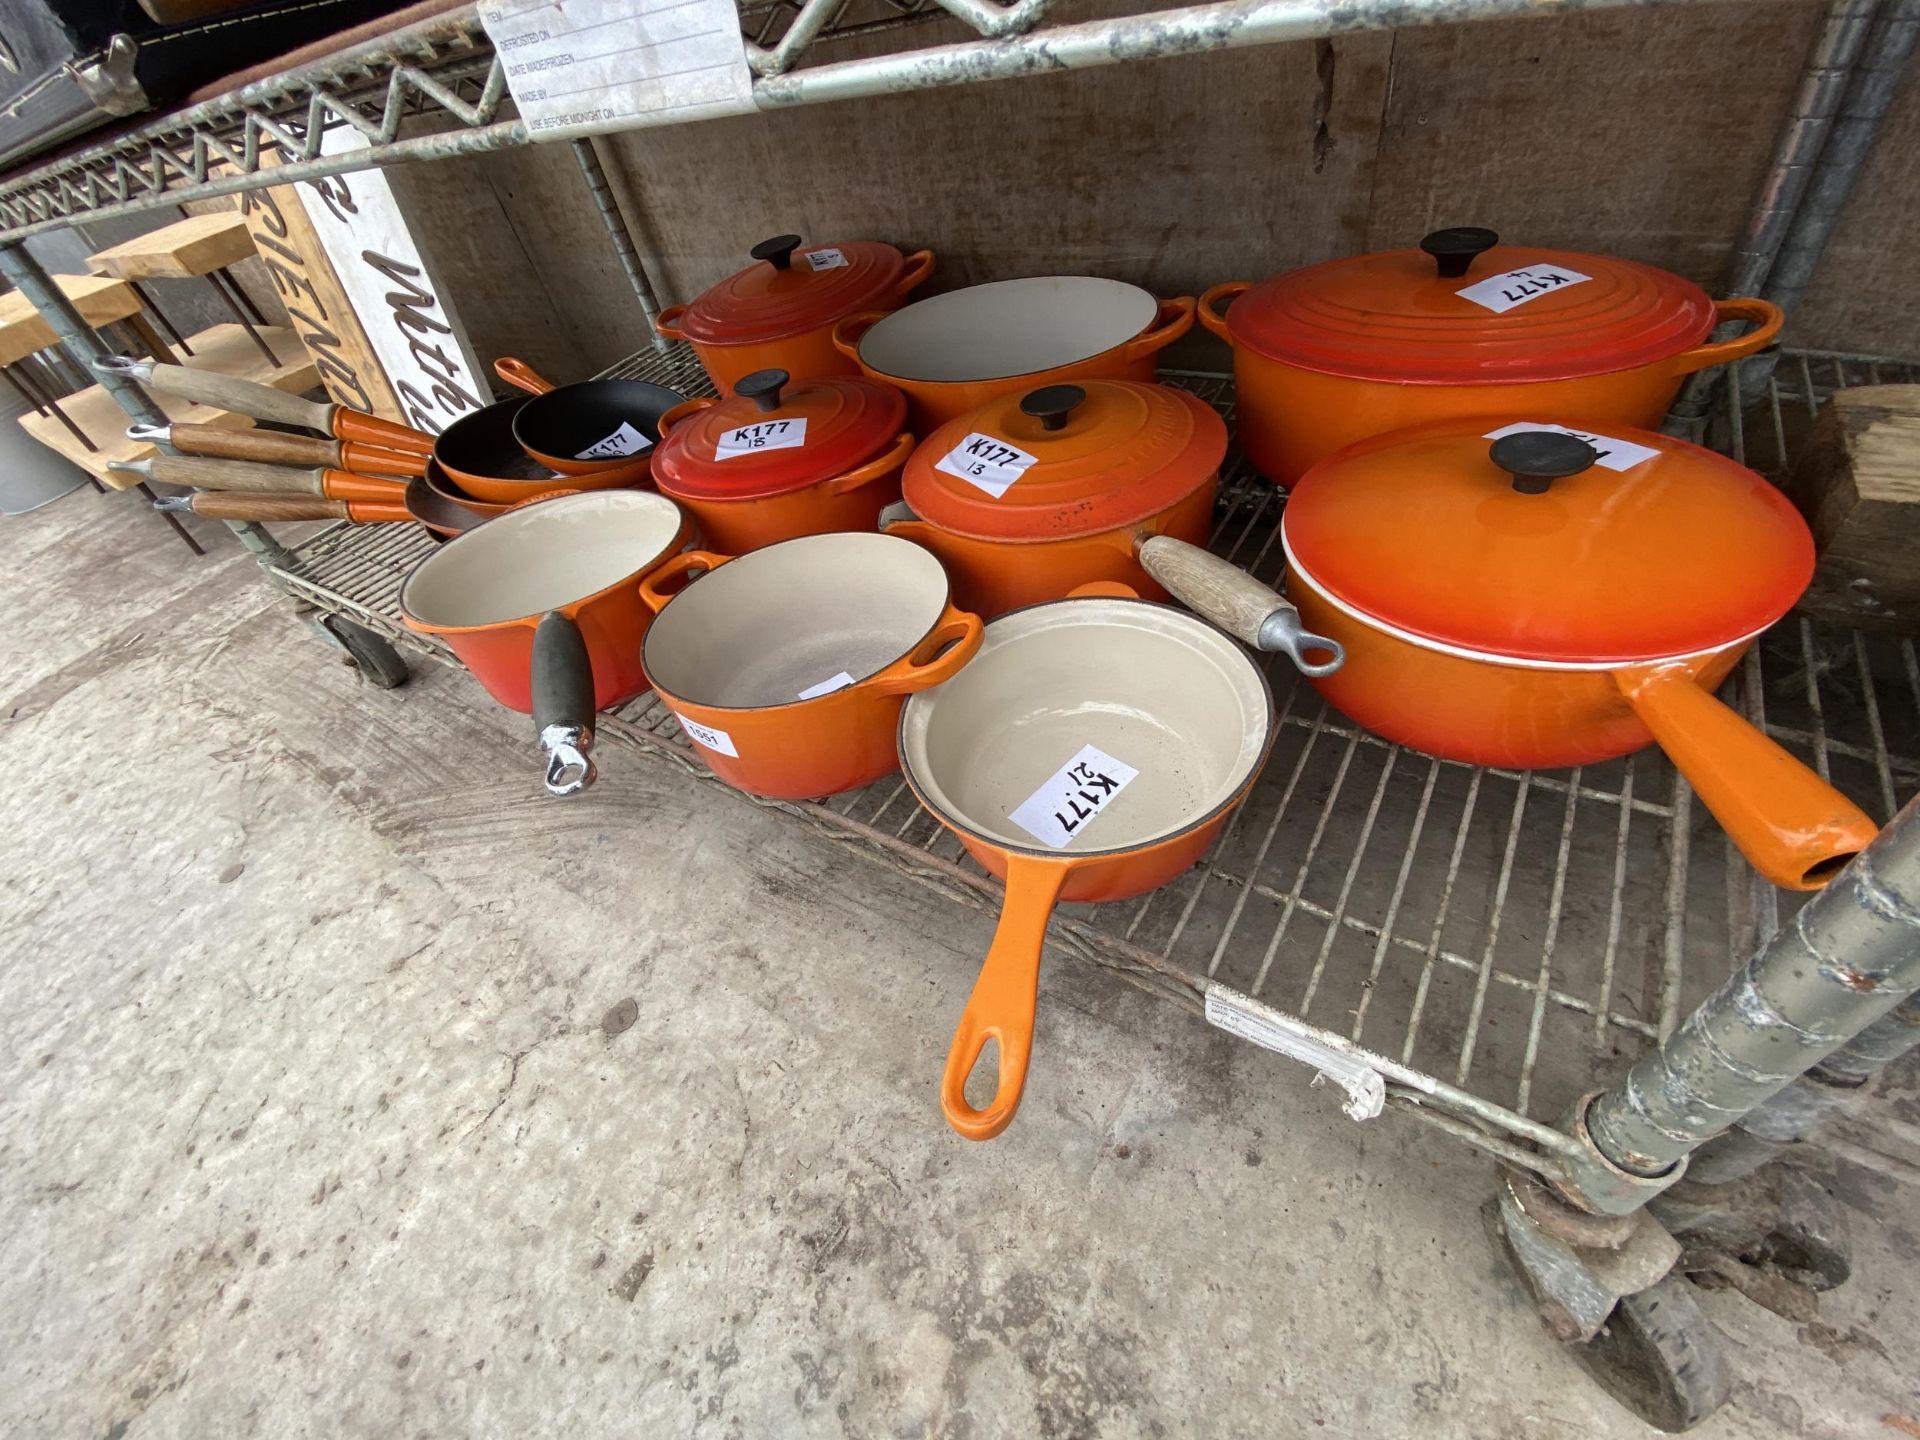 A LARGE COLLECTION OF ORANGE LE CREUSET PANS TO INCLUDE CASAROLE DISHES, VARIOUS SIZED SAUCEPANS AND